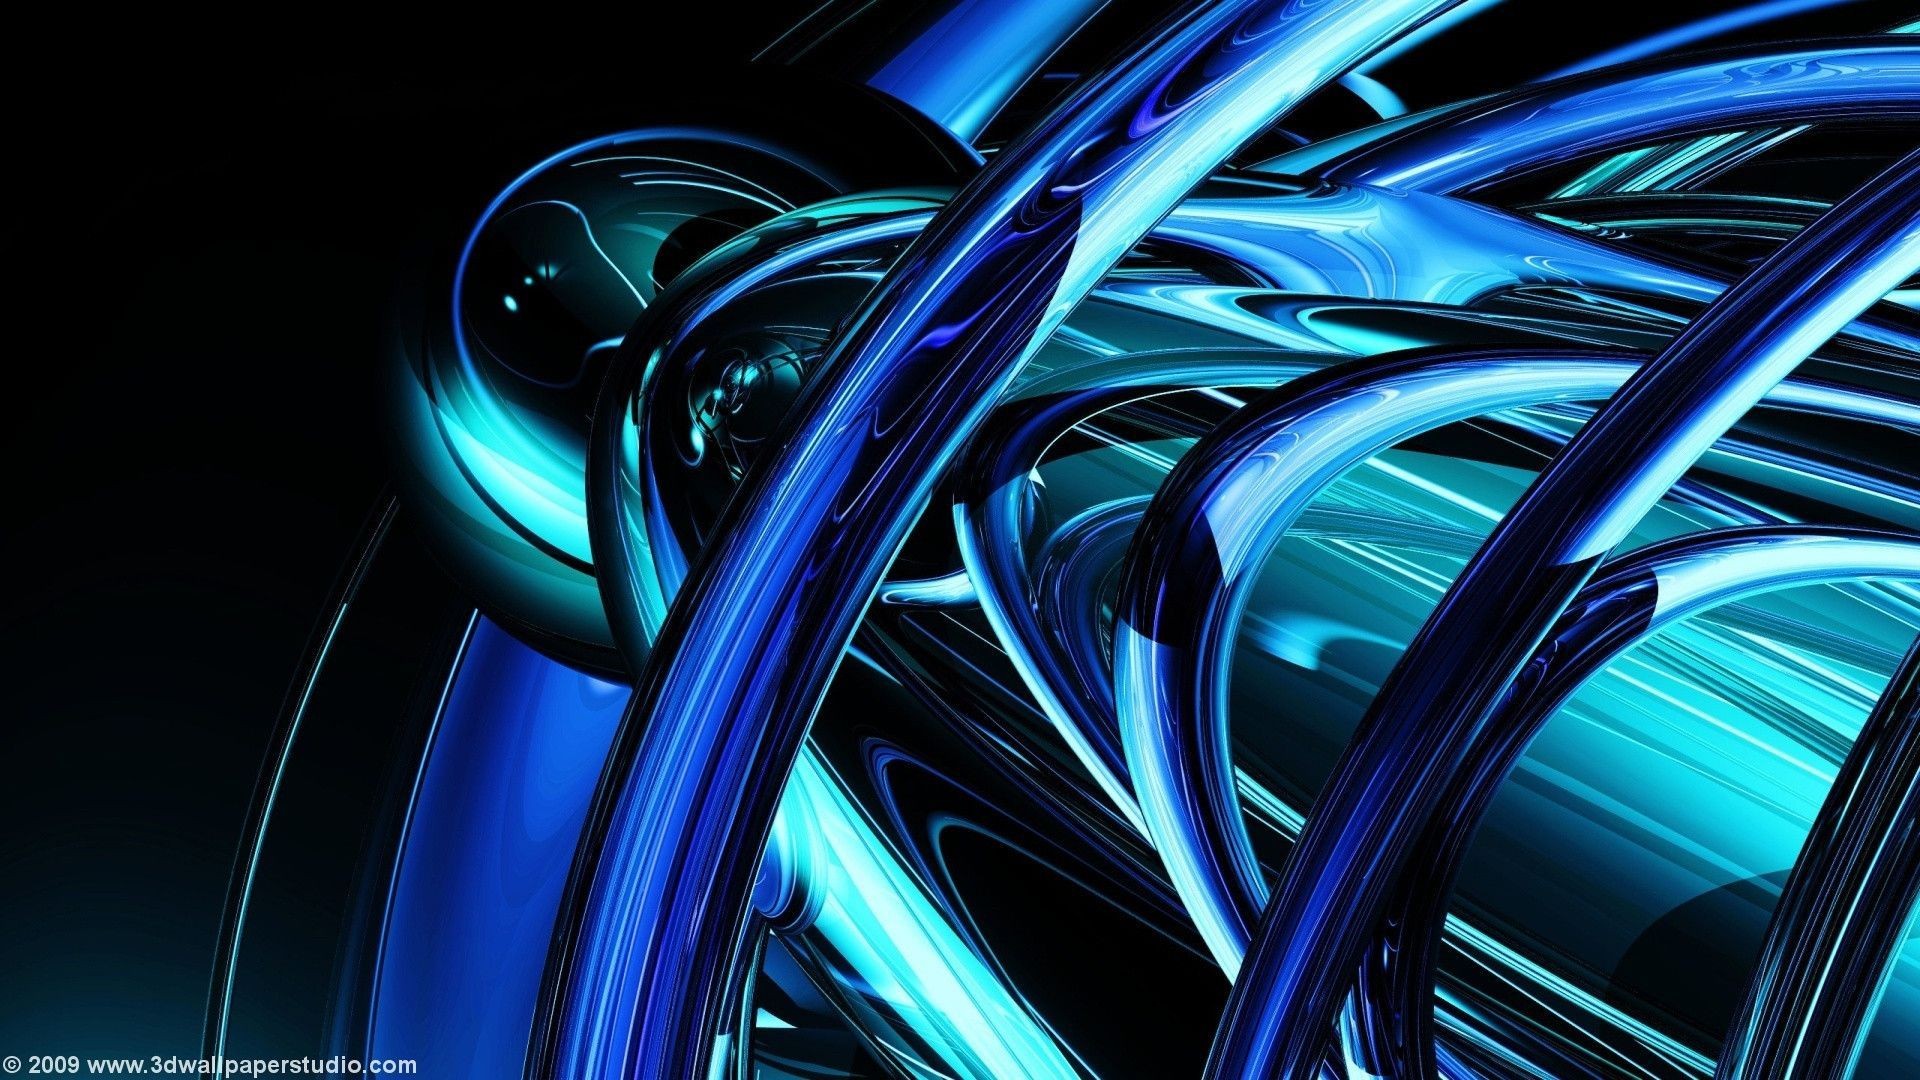  Abstract  wallpaper  1920x1080   Download free cool full HD  